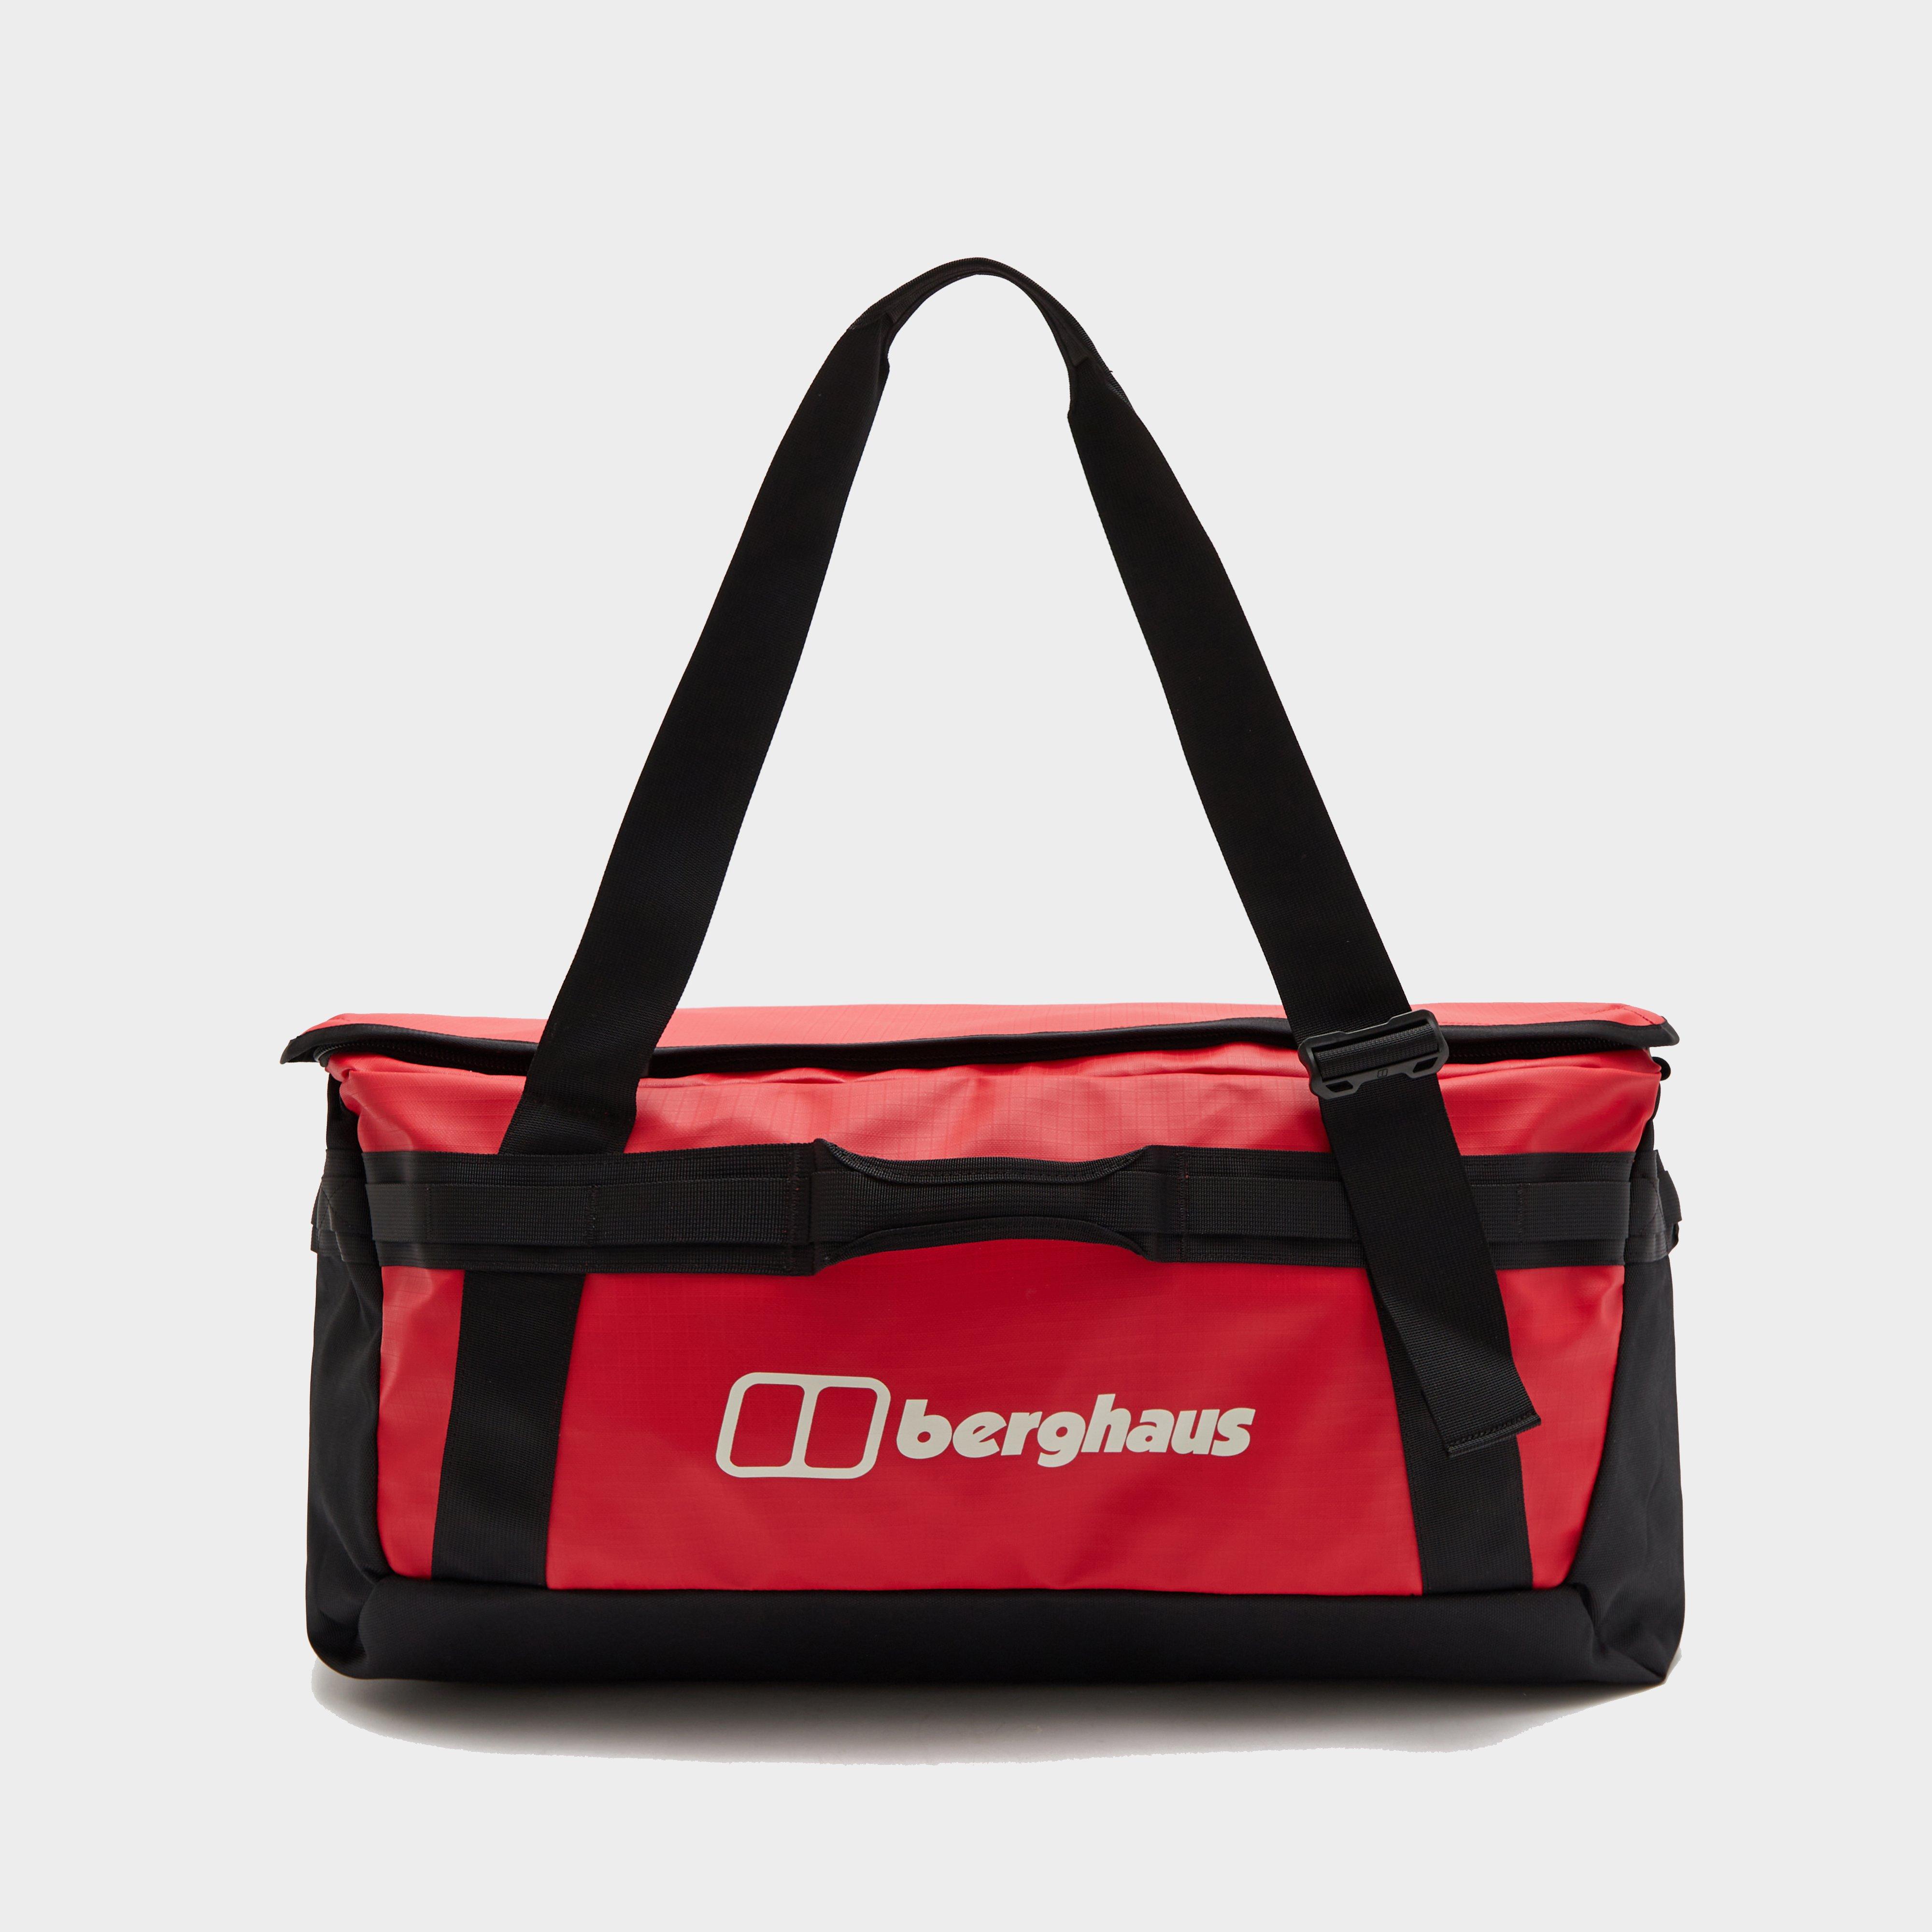  Berghaus 80L Holdall, Red